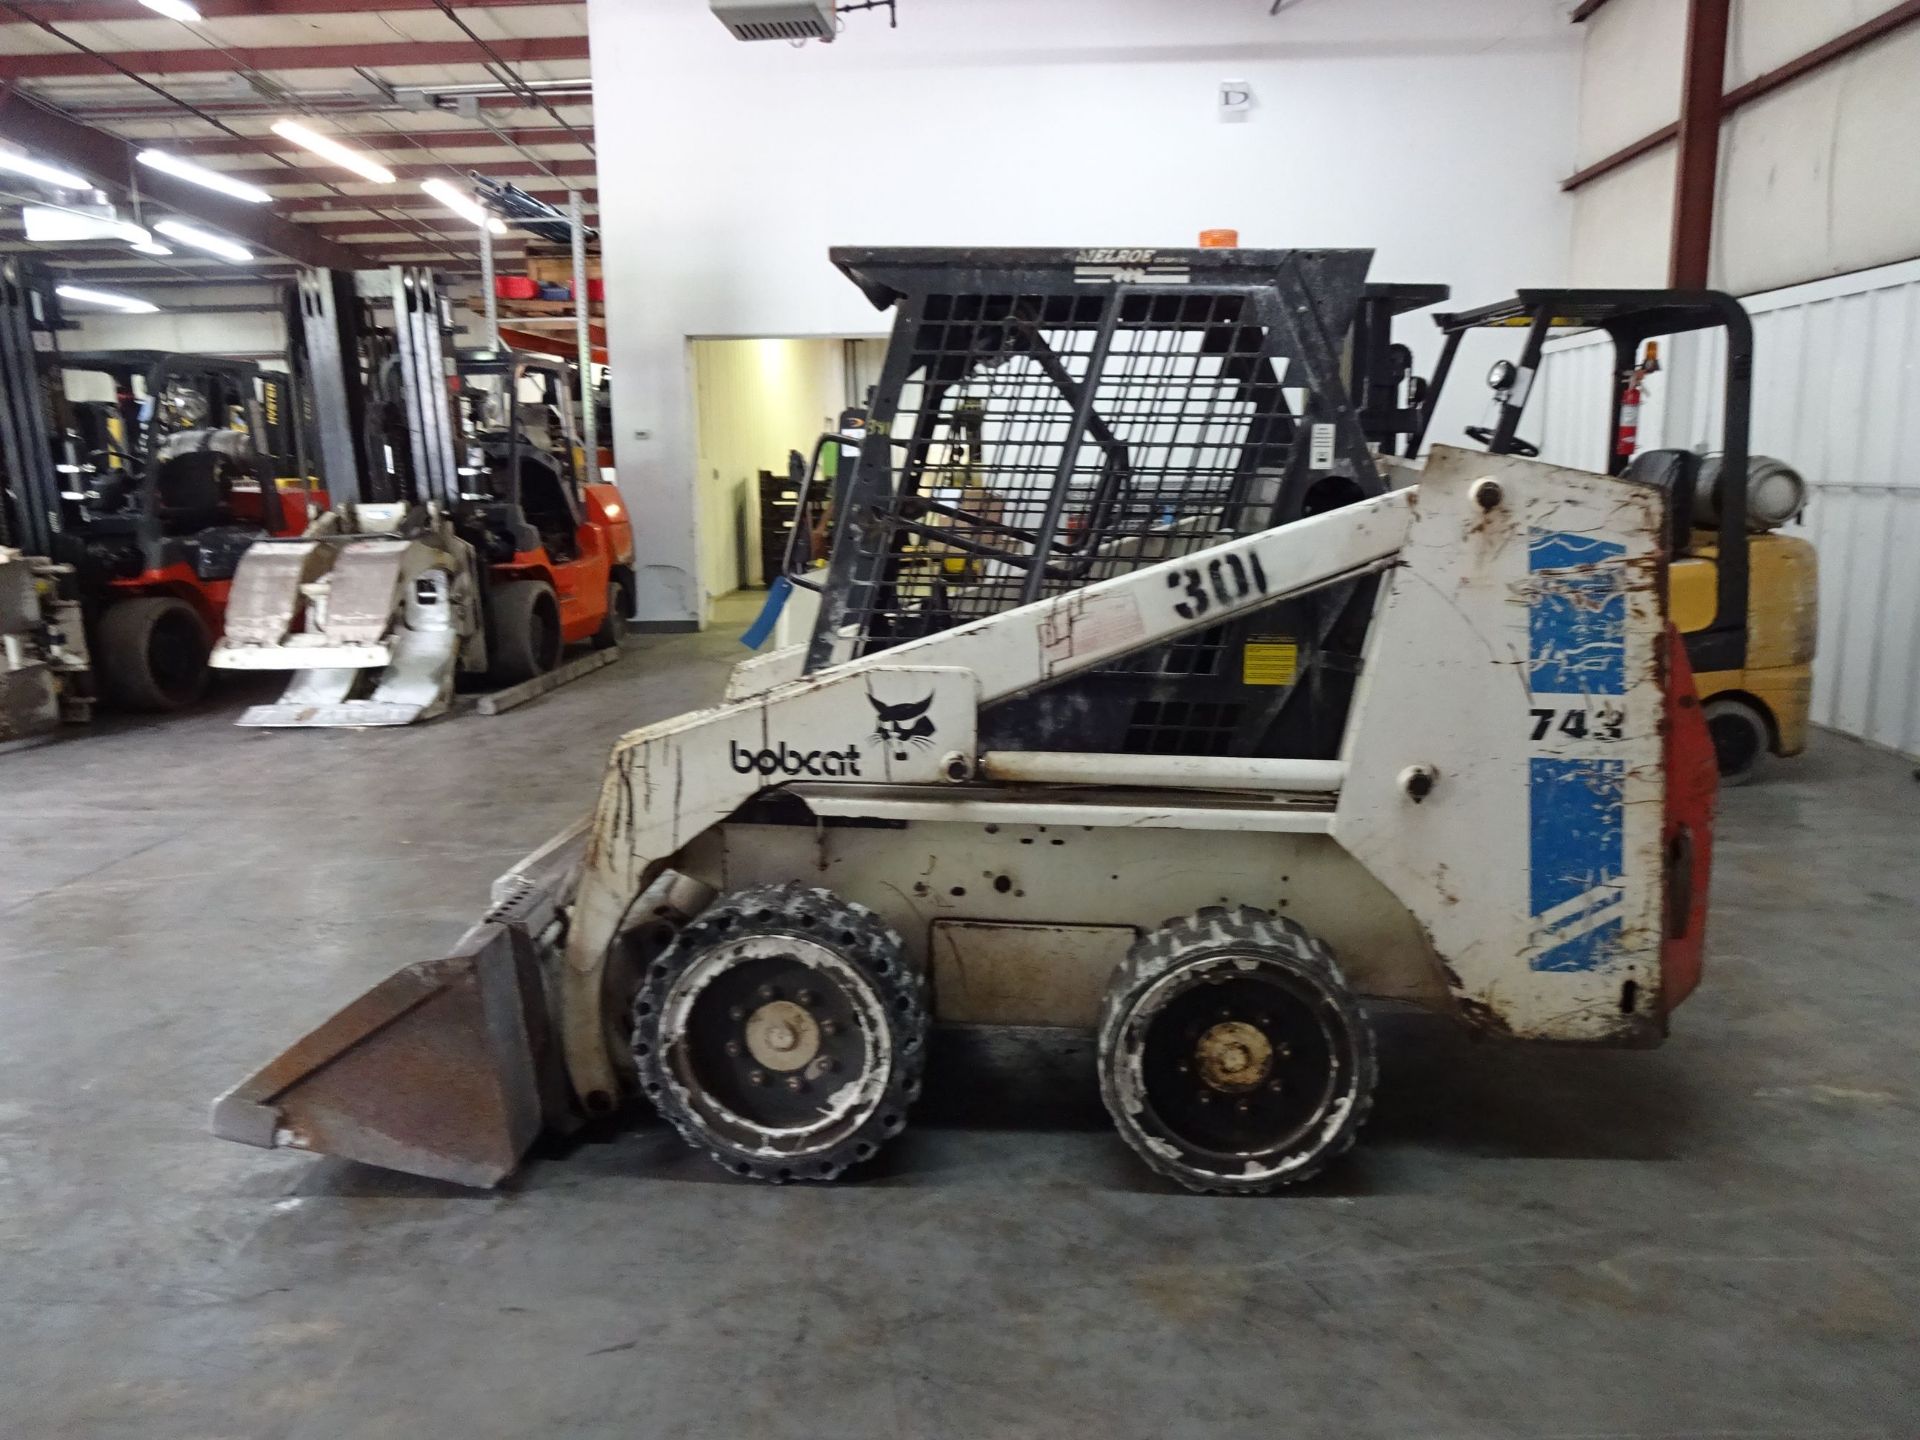 BOBCAT MODEL 743 HARD TIRE DIESEL POWERED SKID STEER; S/N 5019M27017 (4,168 HOURS), FRONT AUXILIARY, - Image 6 of 9